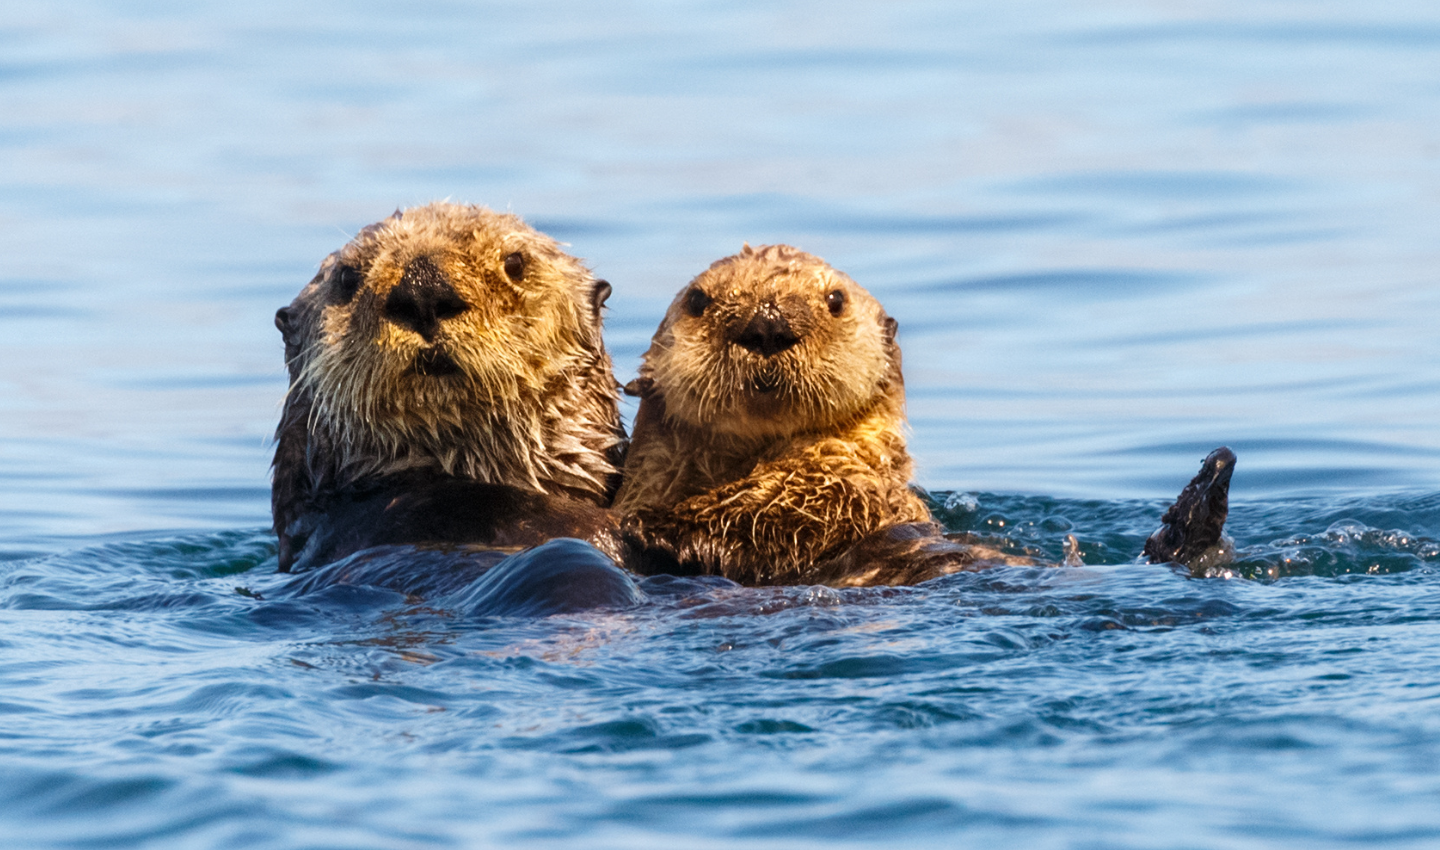 Sea otters hold hands to not drift apart, a Wavemaker Story by Katie.